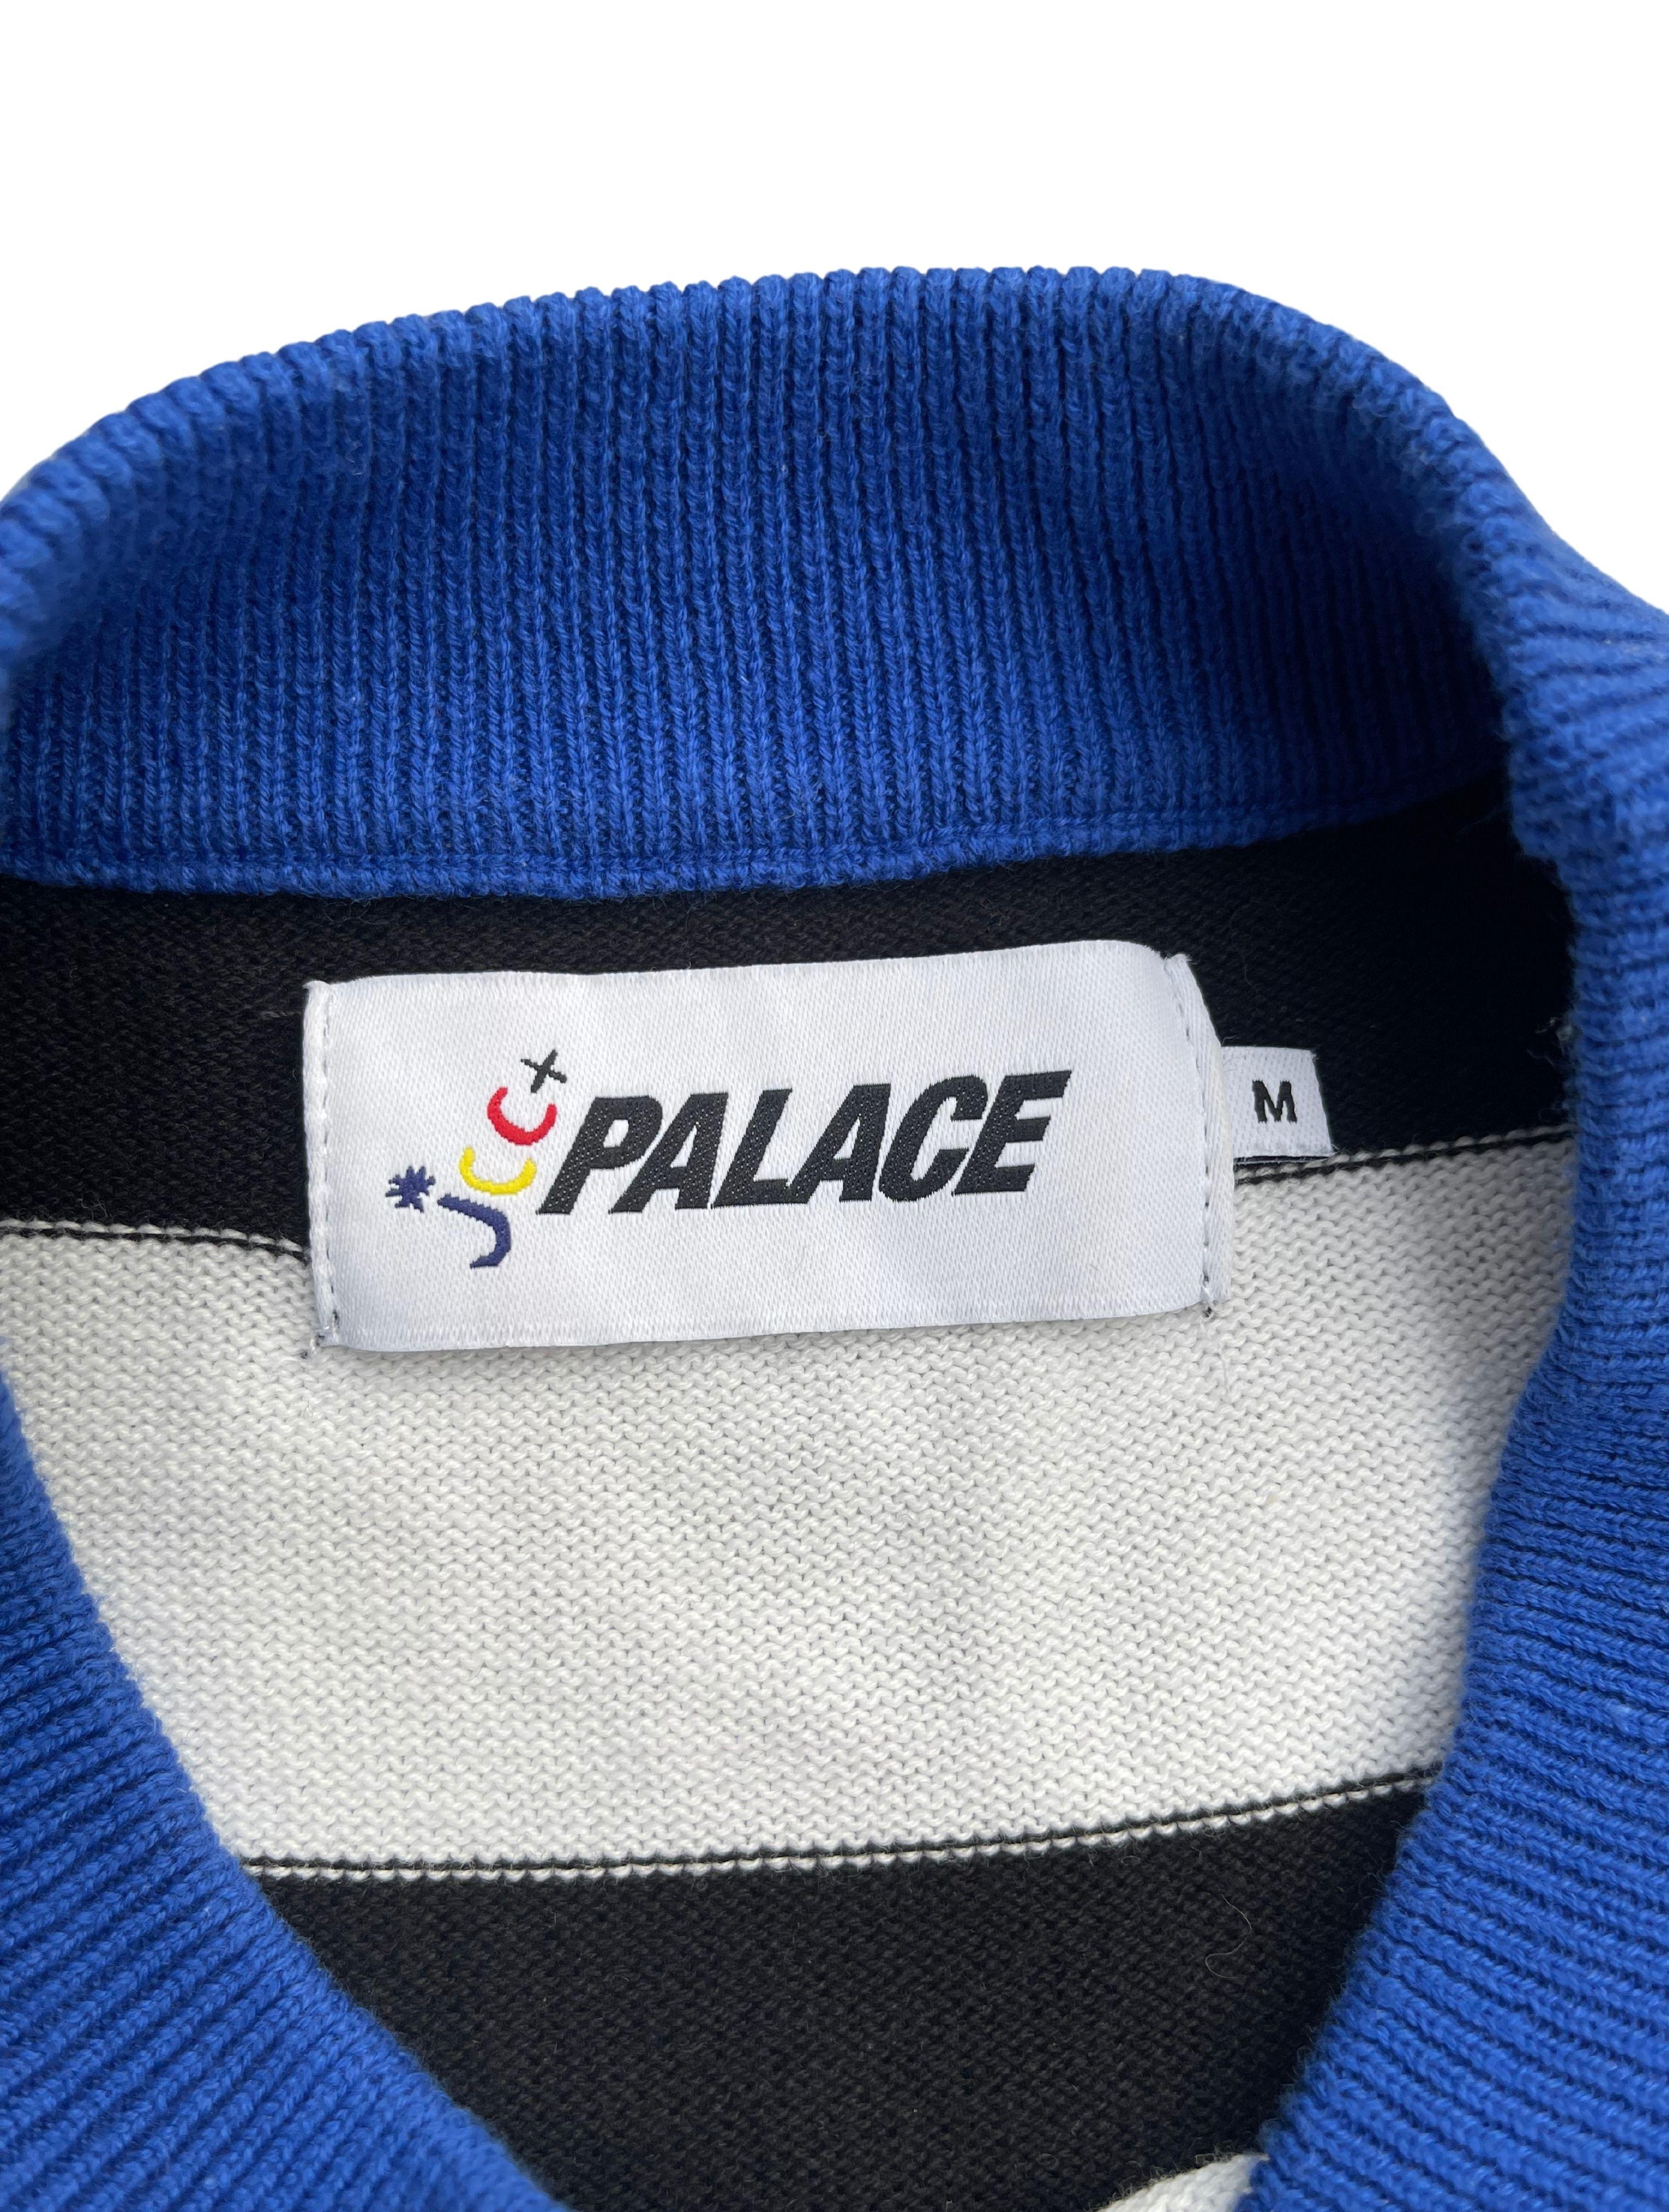 palace cable knit sweater green